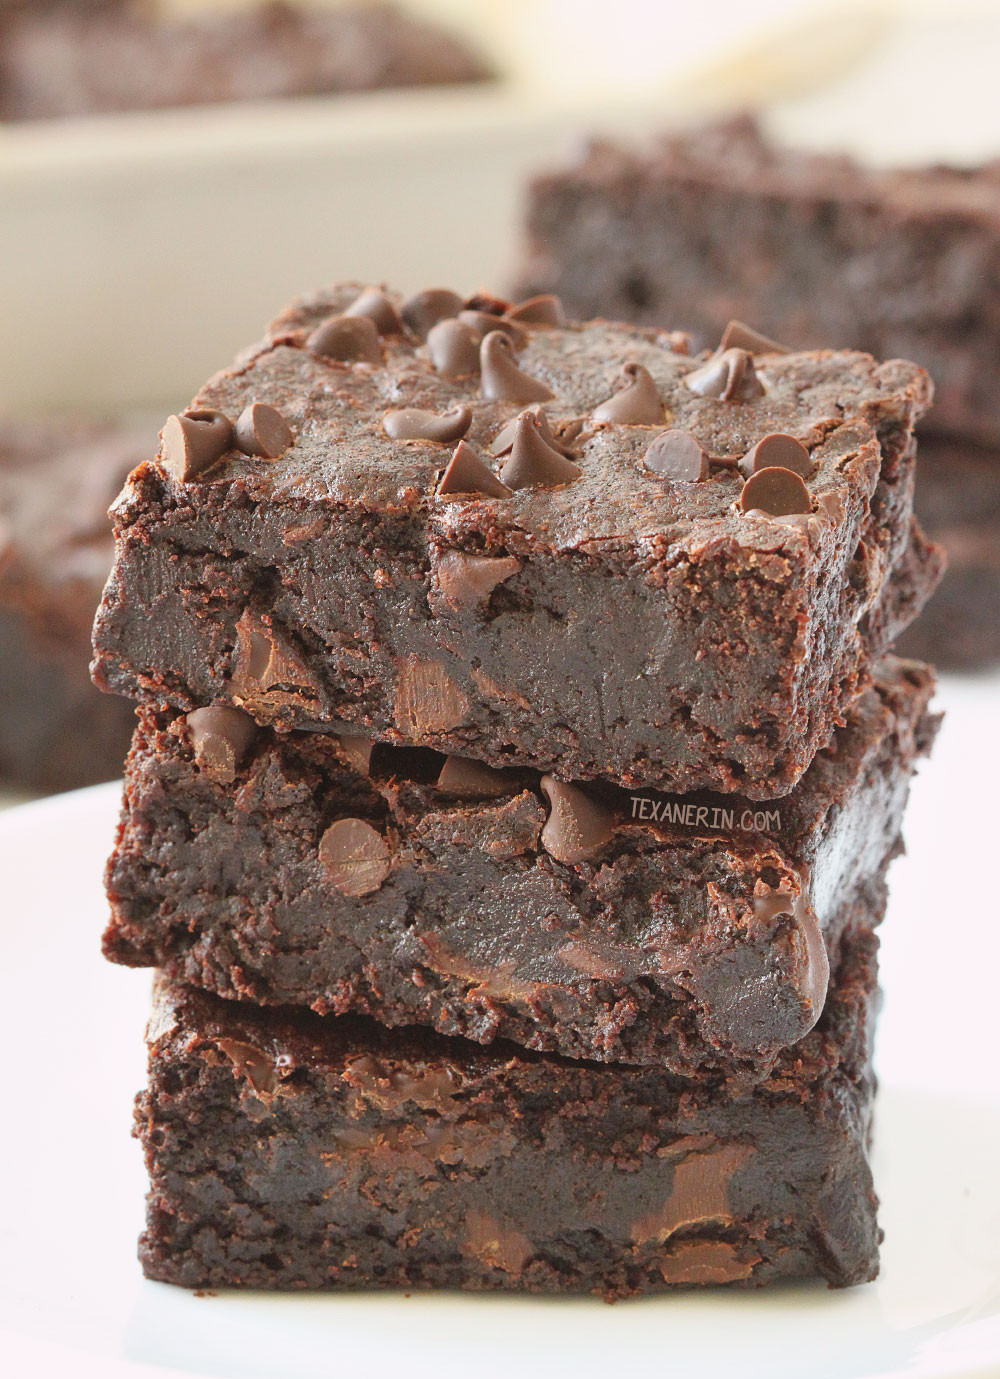 Gluten And Dairy Free Desserts To Buy
 The Best Gluten free Brownies dairy free whole grain